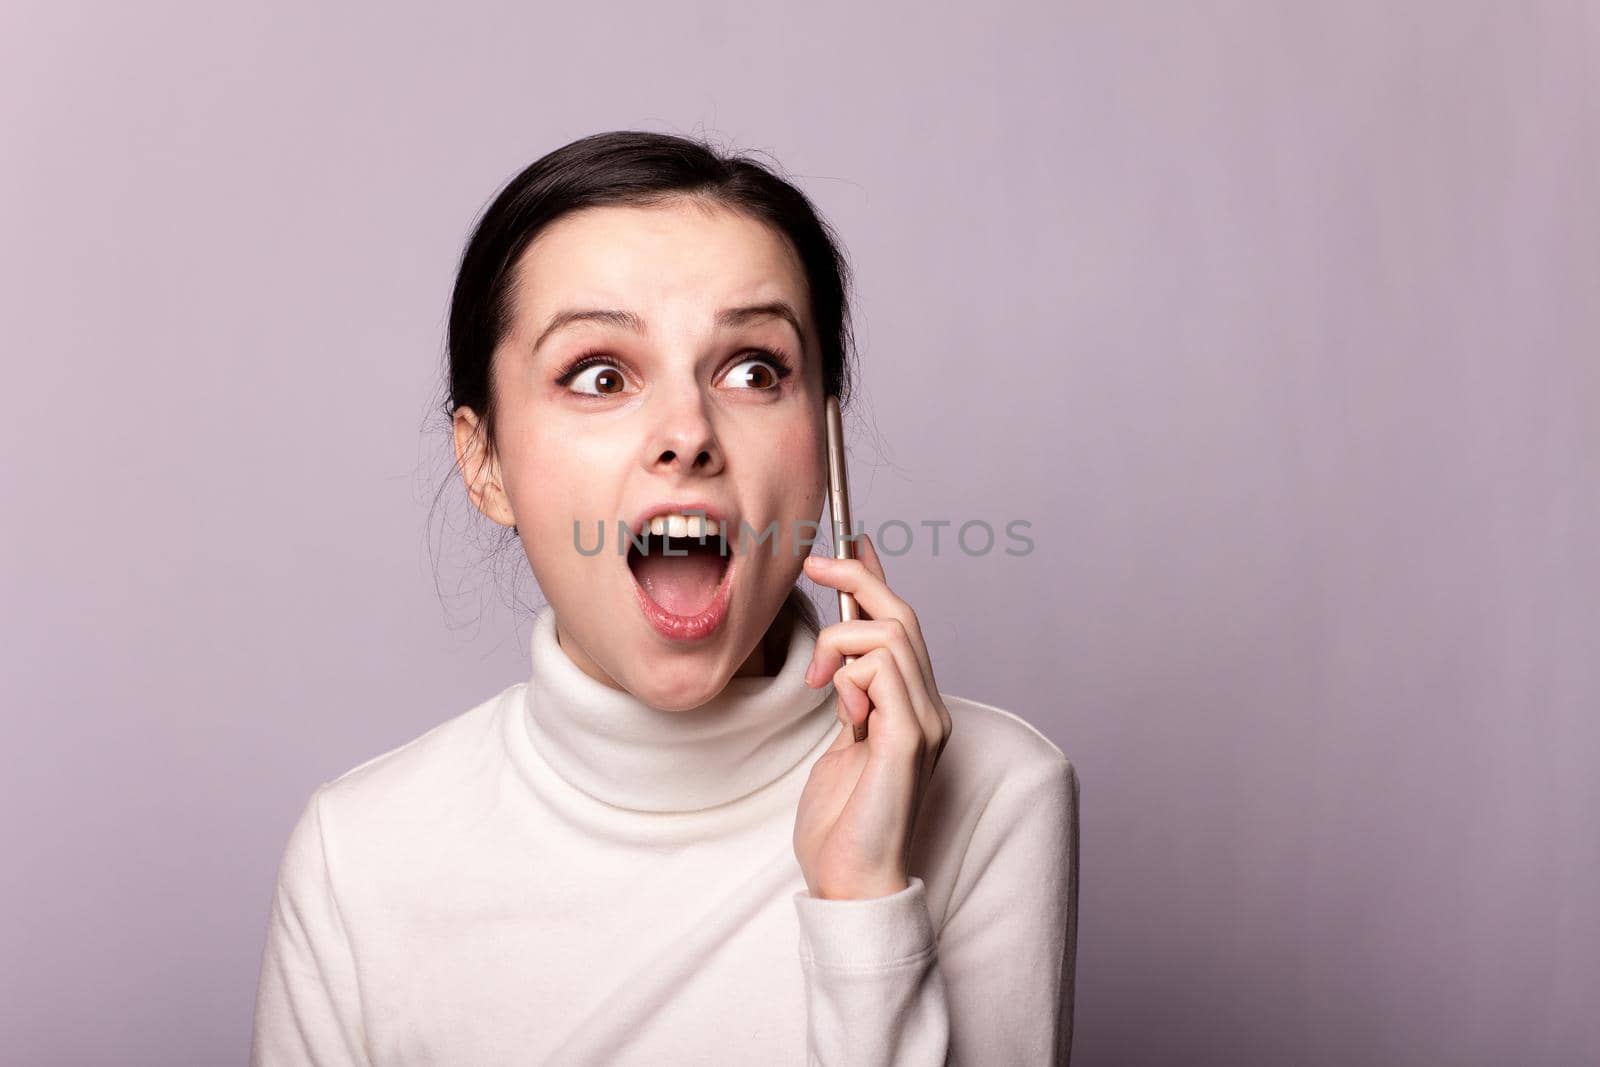 woman in a white turtleneck talking on the phone, portrait on a gray background by shilovskaya